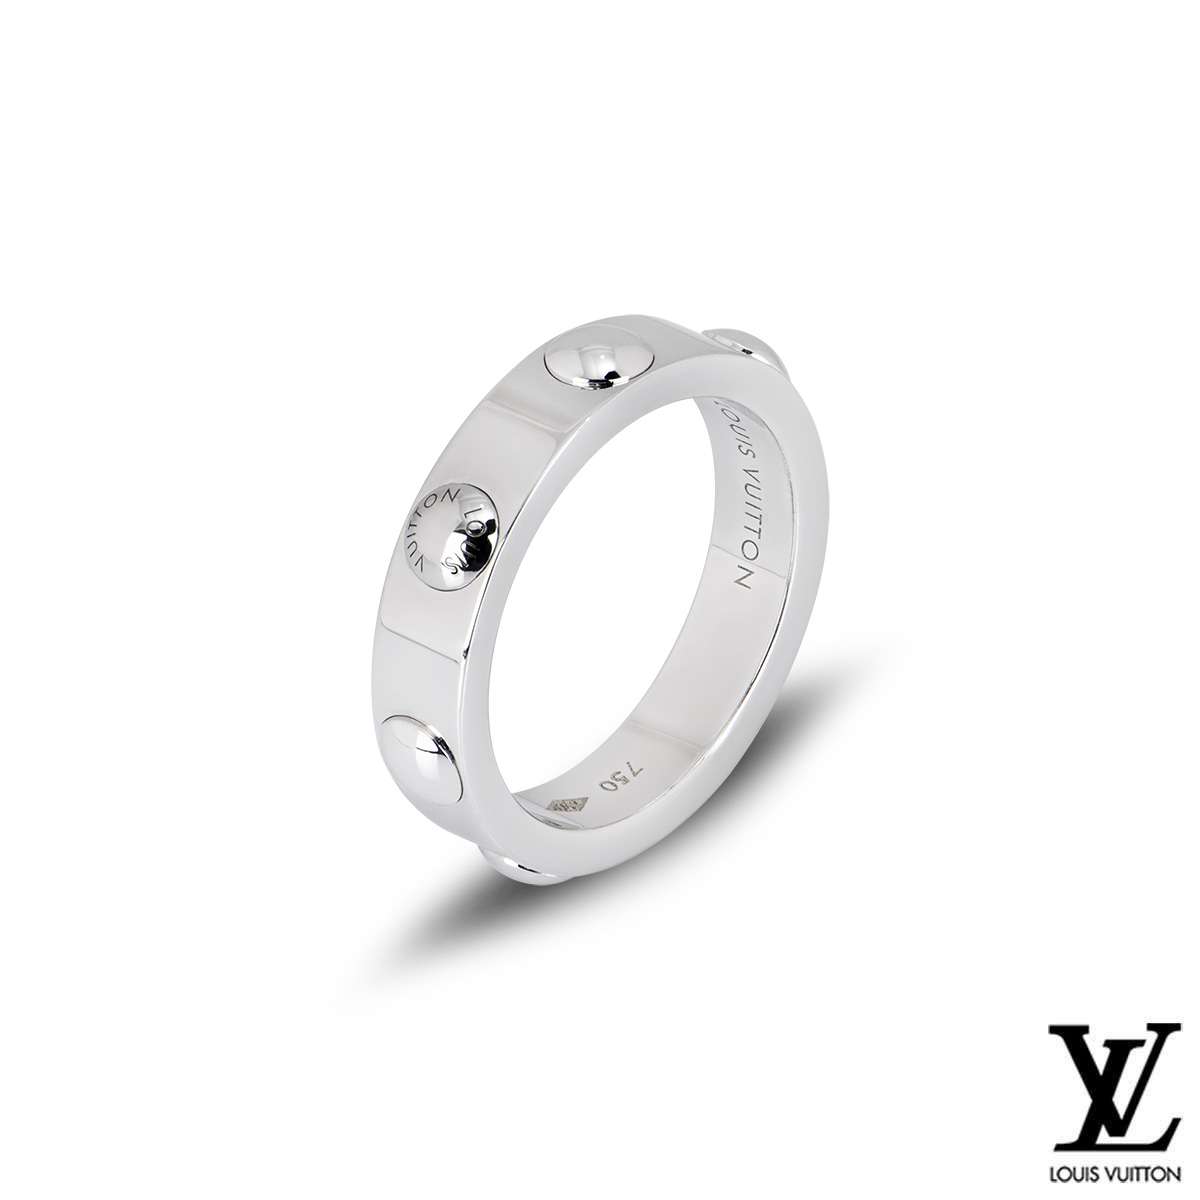 Louis Vuitton White Gold Empreinte Band Ring Available For Immediate Sale  At Sotheby's